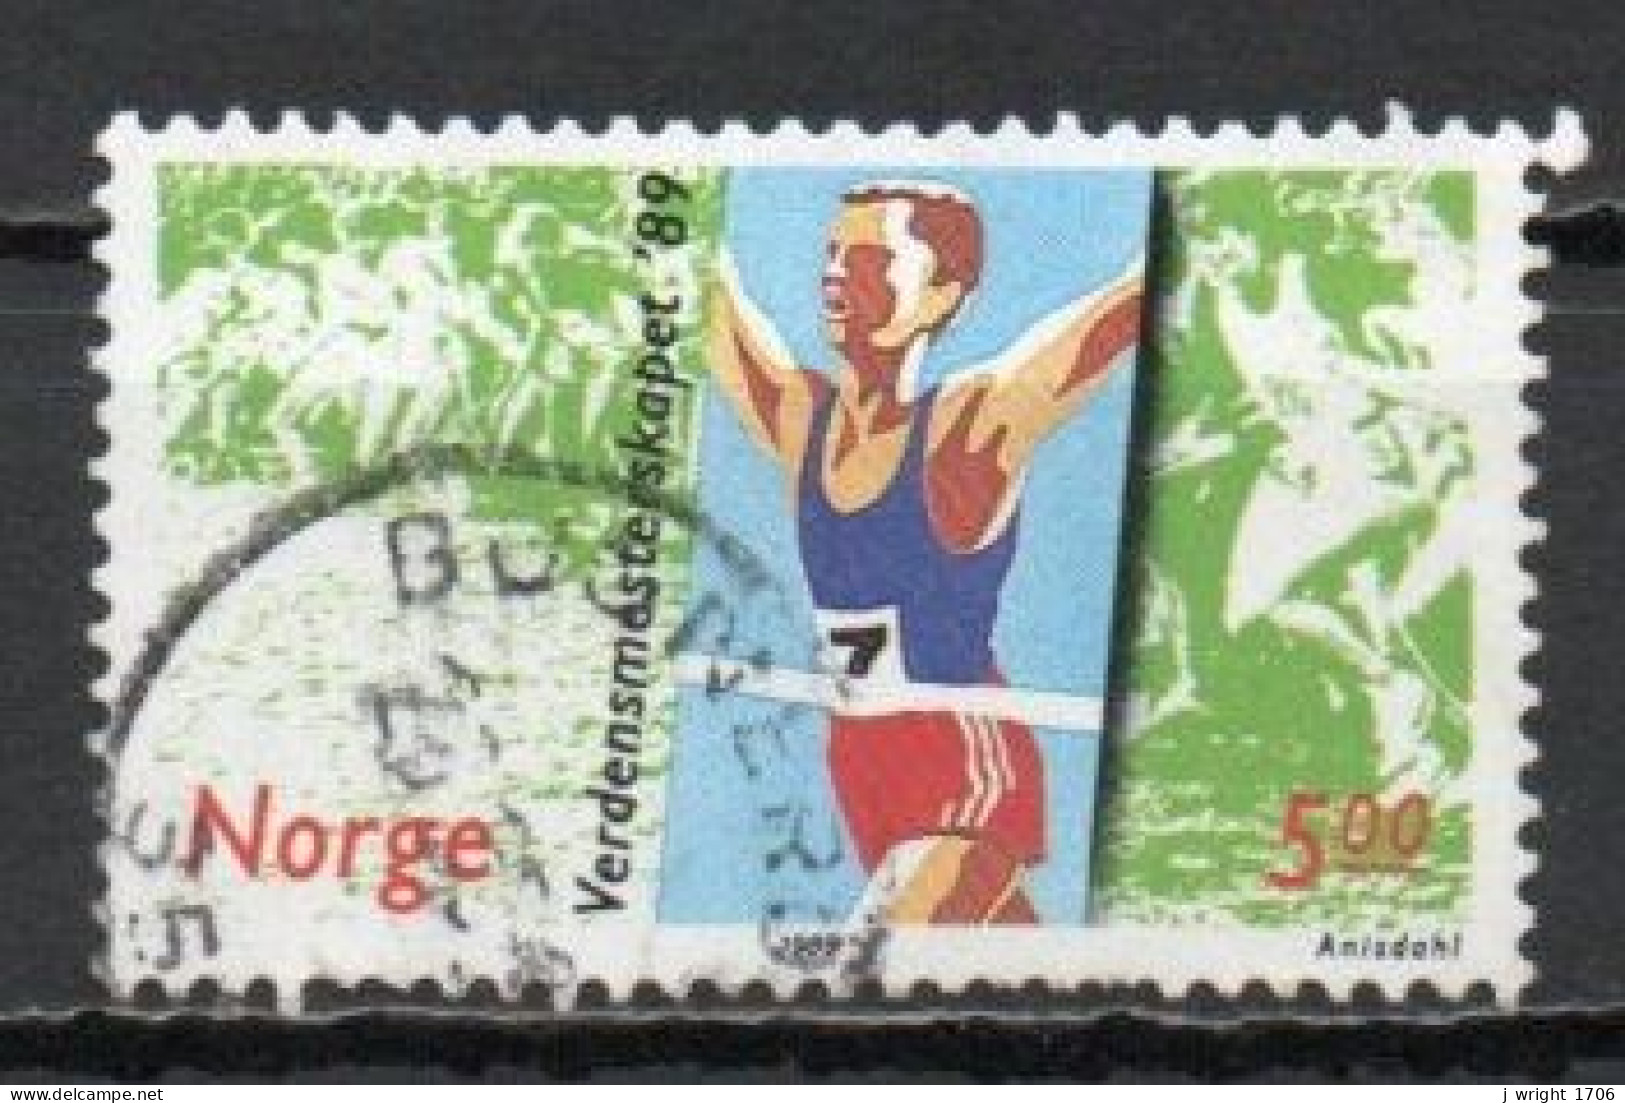 Norway, 1989, World Cross Country Championships, 5kr, USED - Usati